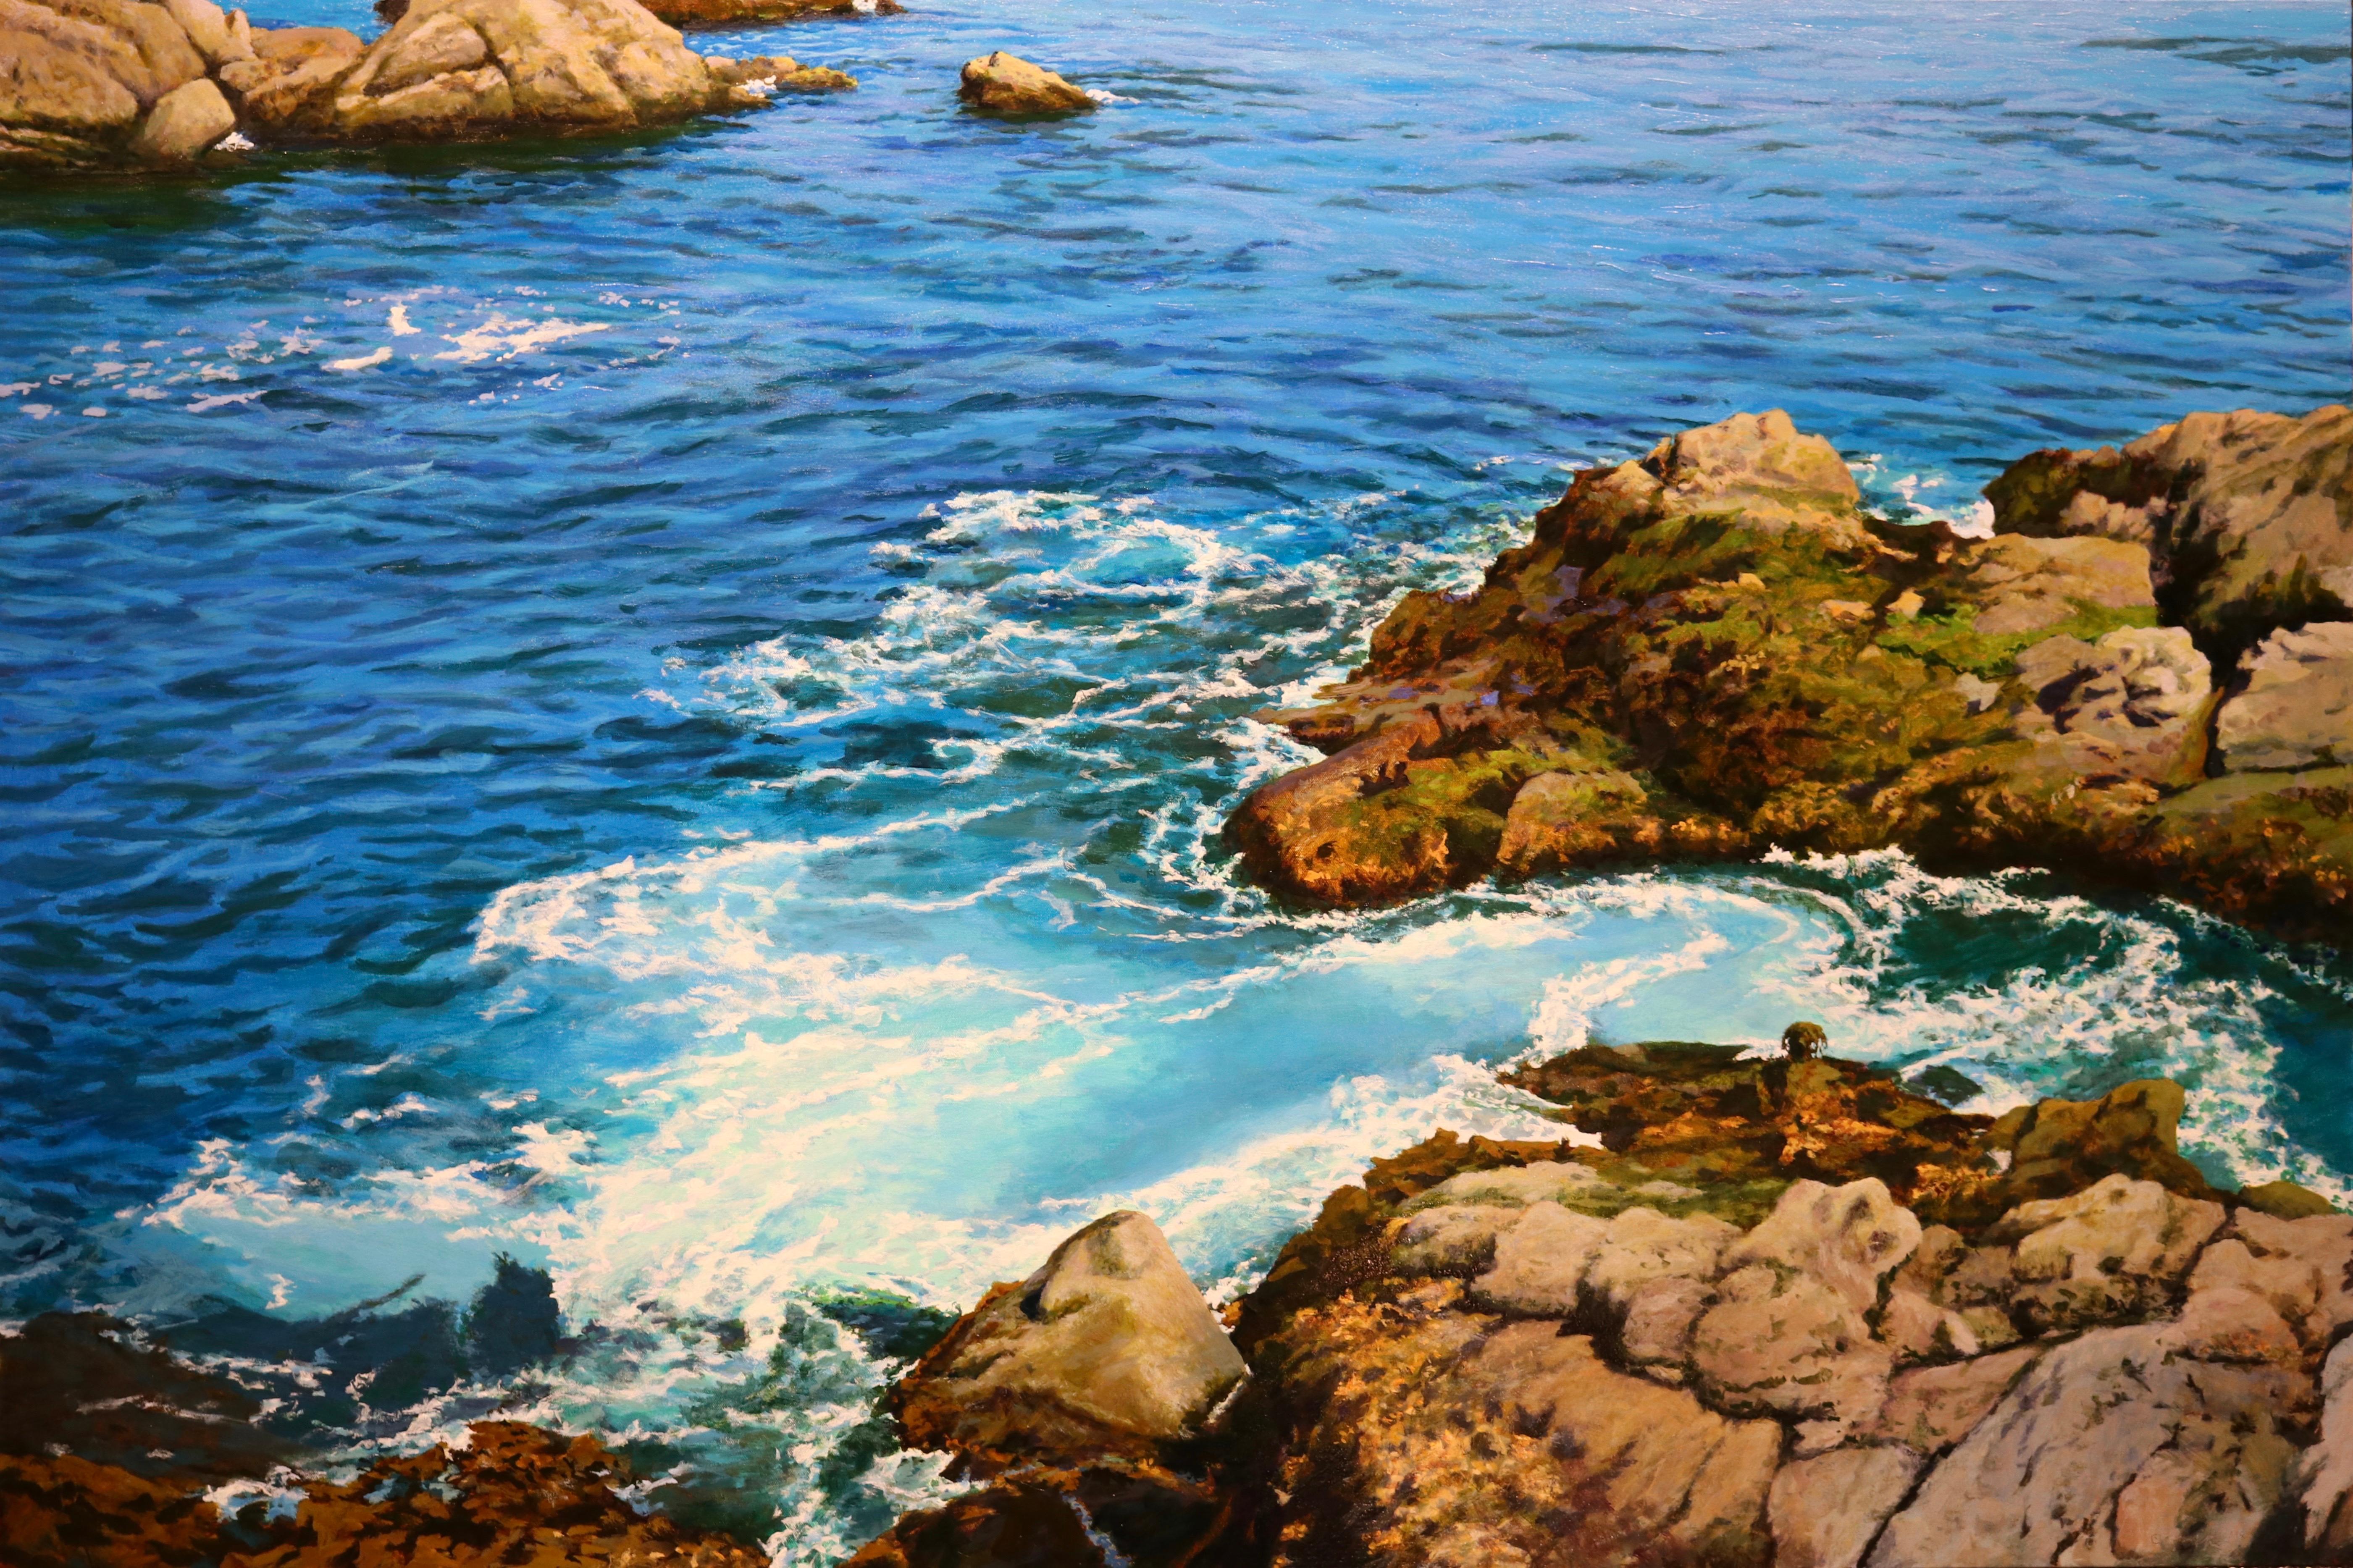 Peter Loftus Landscape Painting - Seaworld: Mendocino / oil on canvas painting - 40 x 60 inches